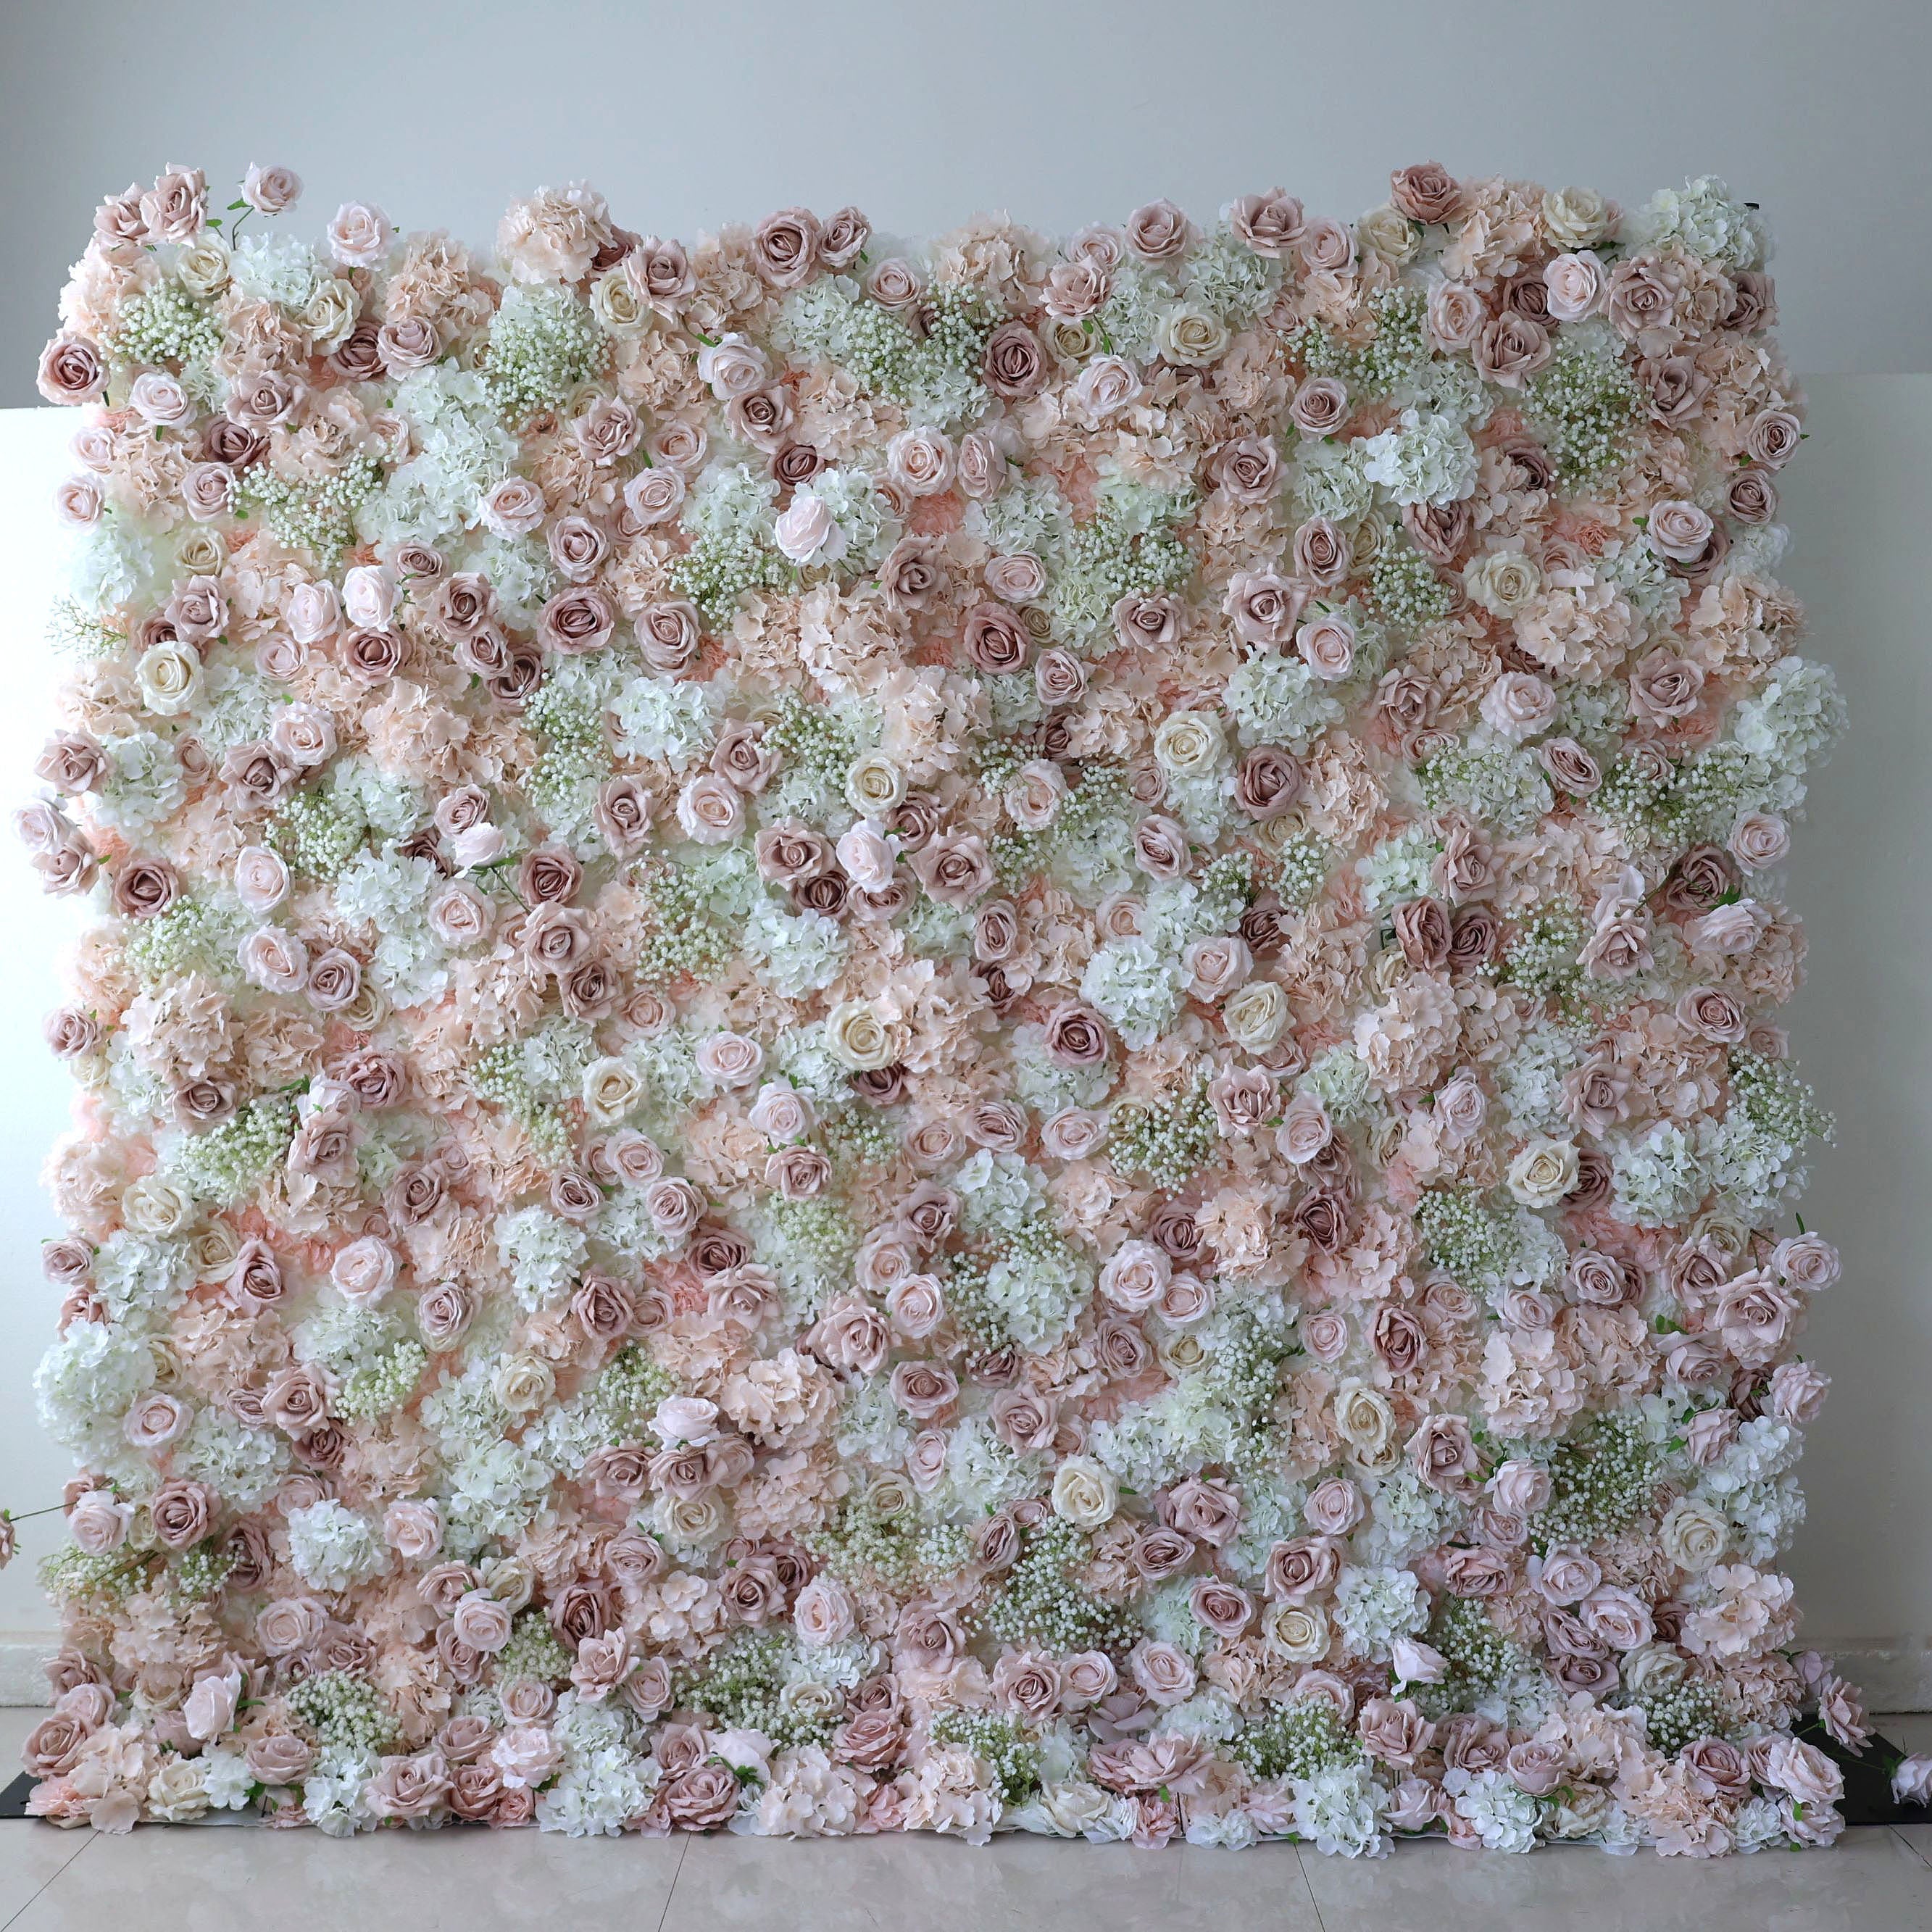 Valar Flowers Roll Up Fabric Artificial Flower Wall Wedding Backdrop, Floral Party Decor, Event Photography-VF-374